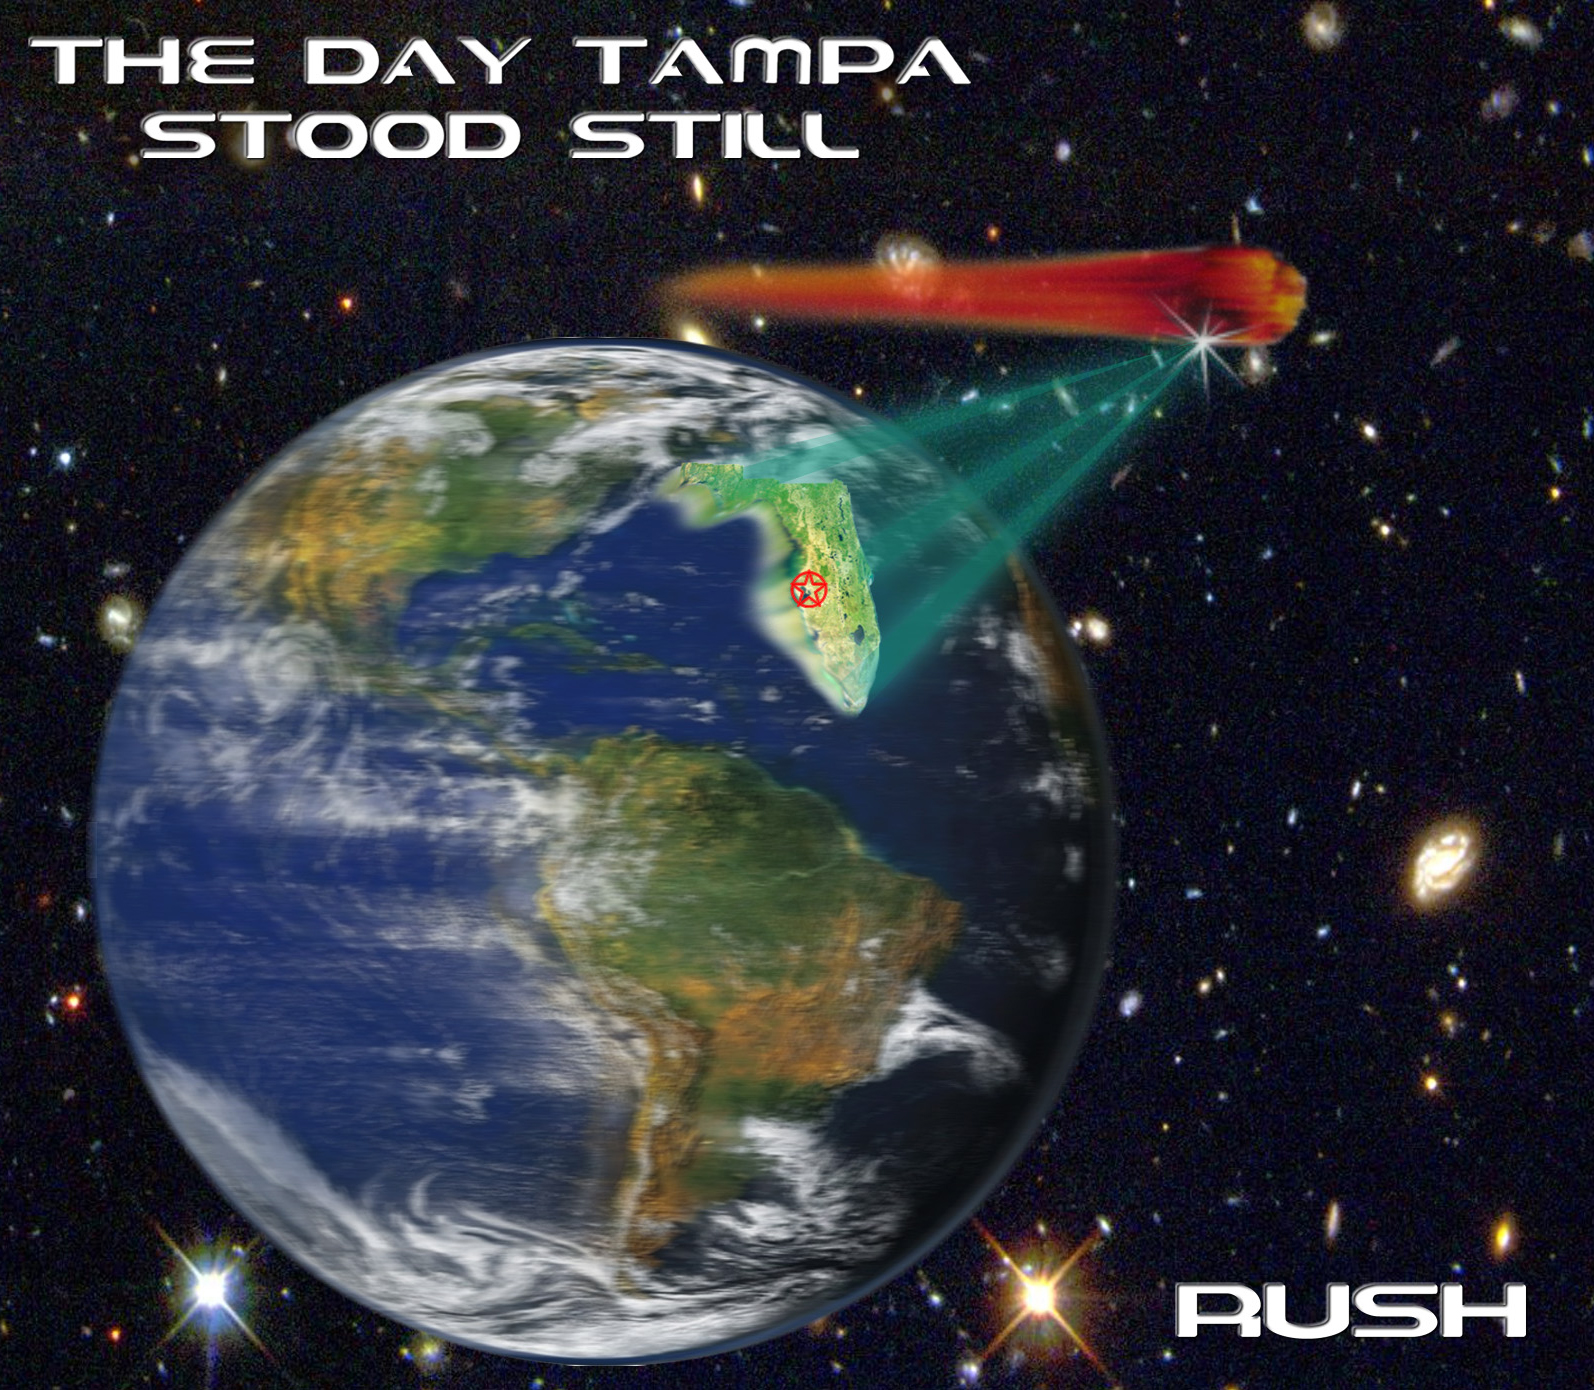 Rush - The Day Tampa Stood Still